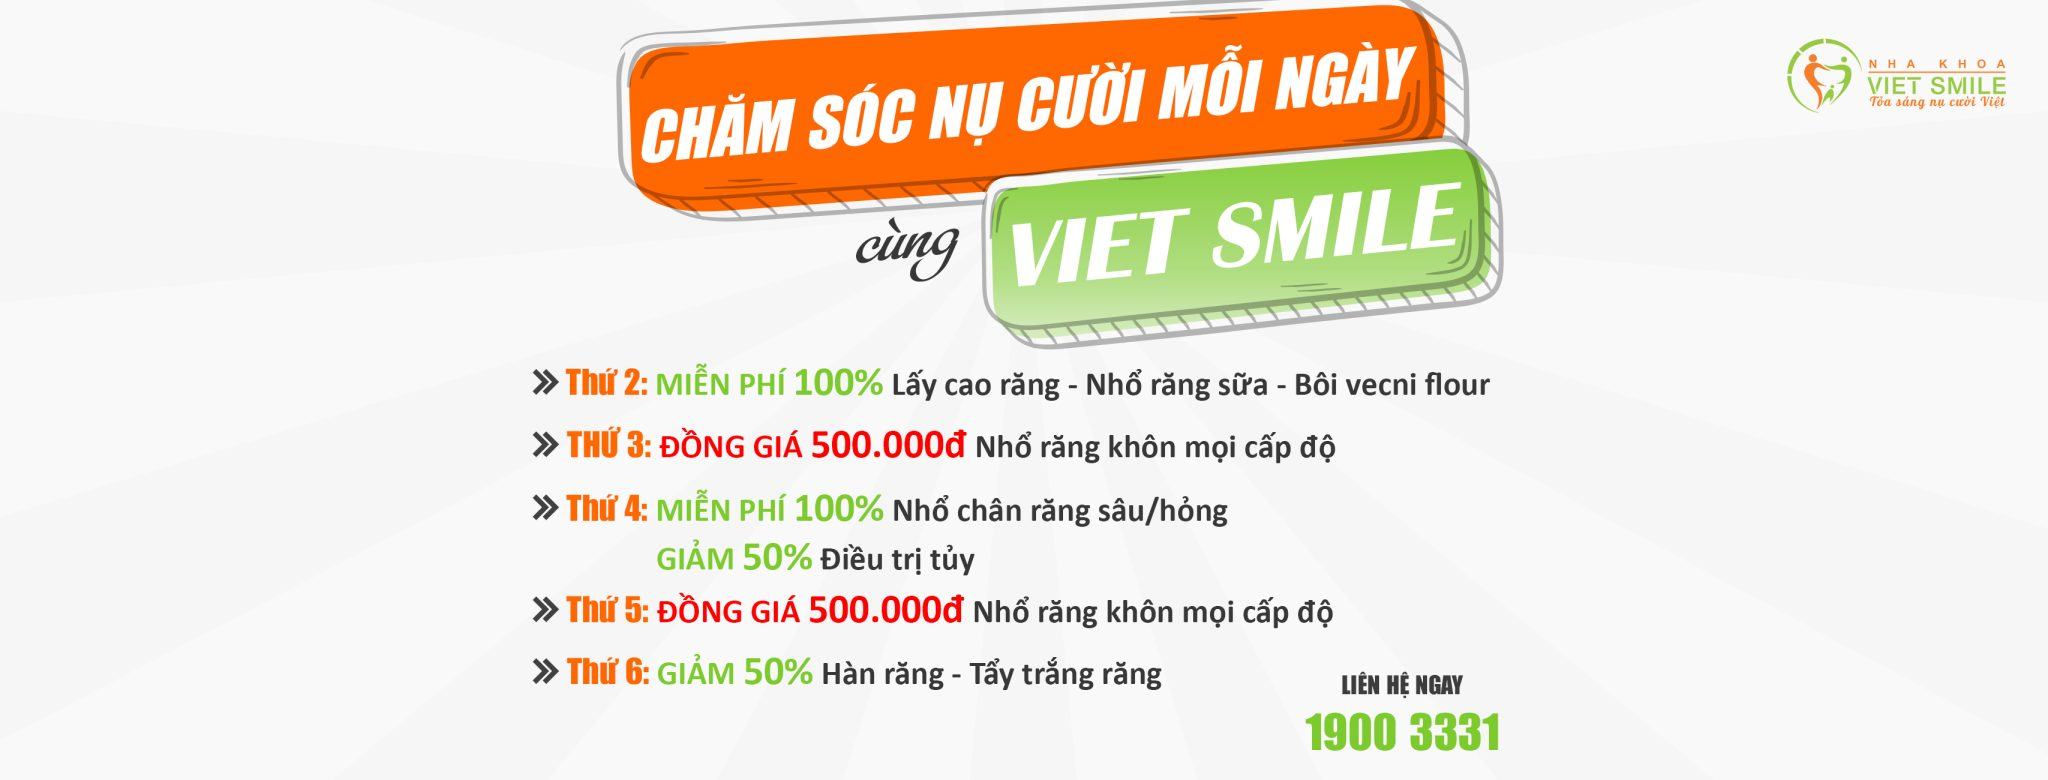 Vietsmile cham soc nu cuoi moi ngay cung viet smile web scaled